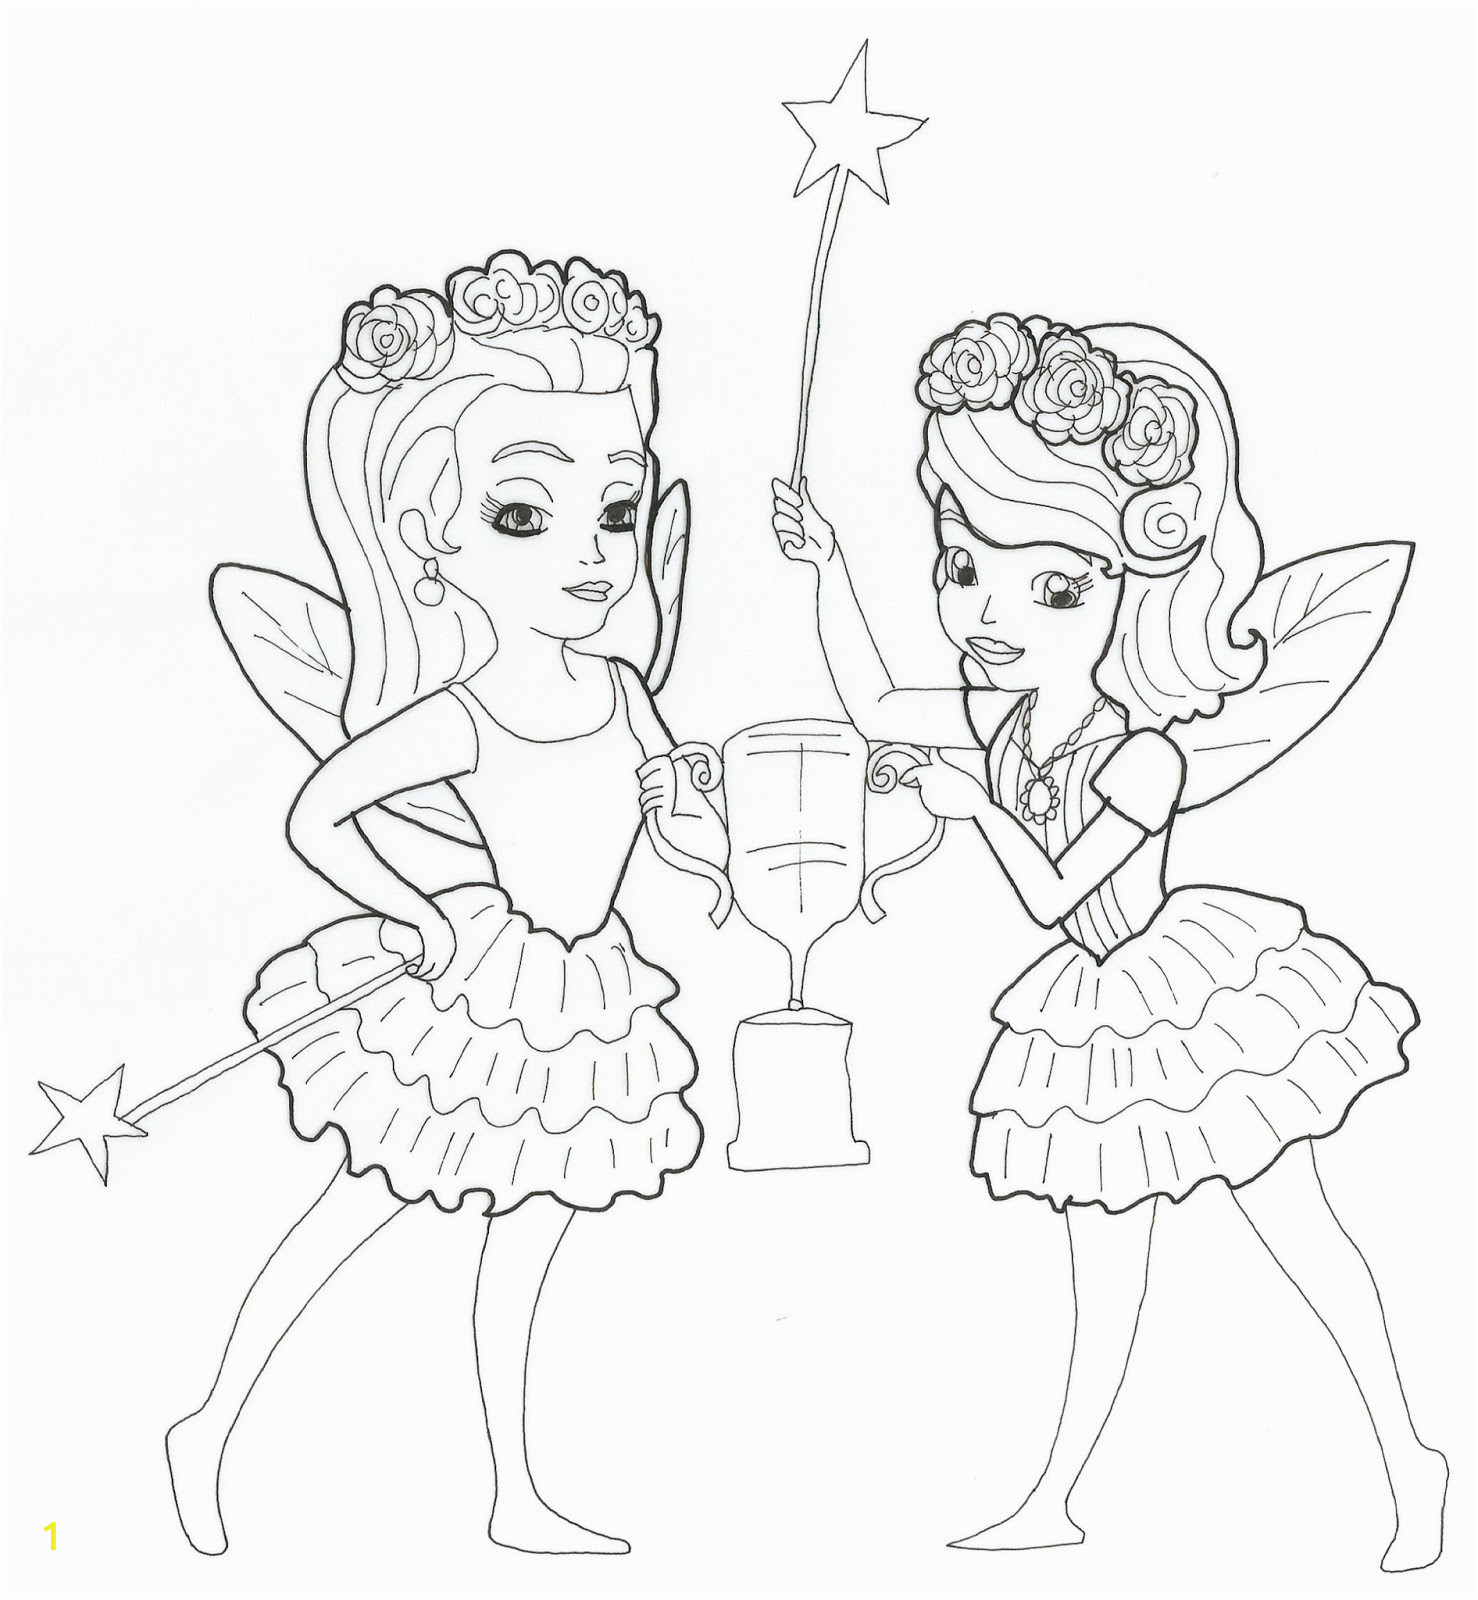 Sofia the First Printable Coloring Pages sofia the First Coloring Pages April 2016